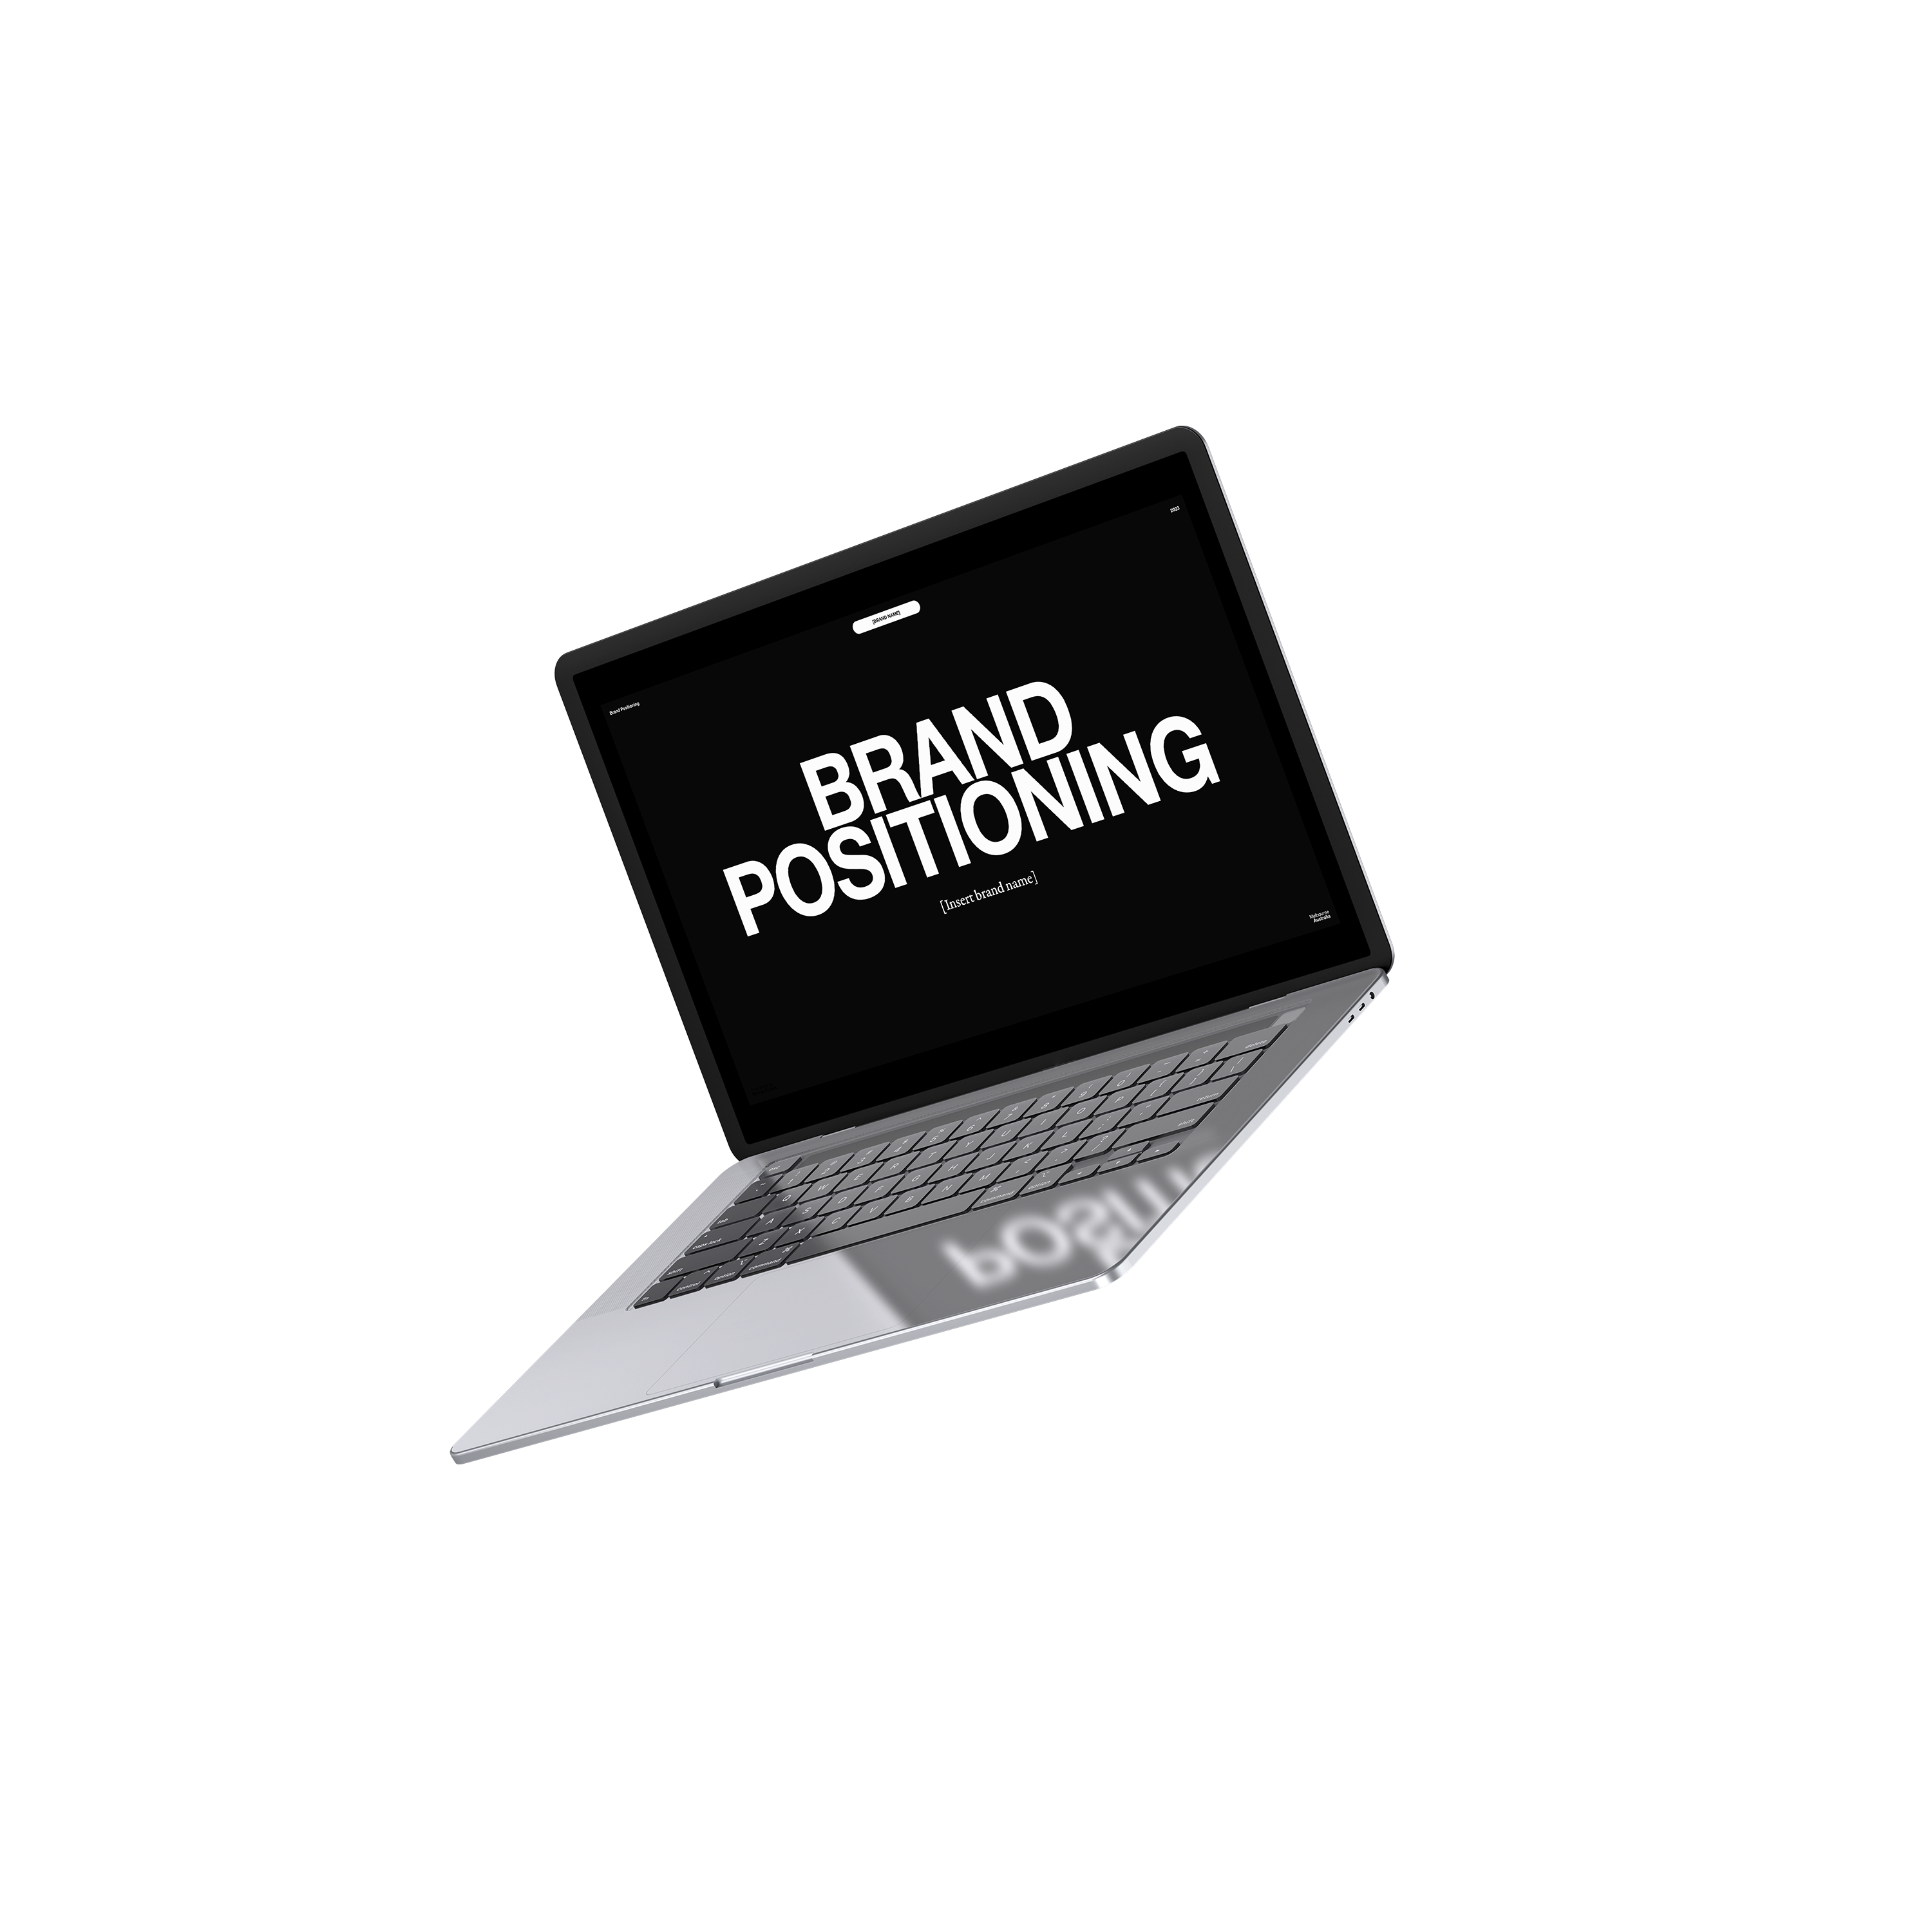 Brand Positioning Template